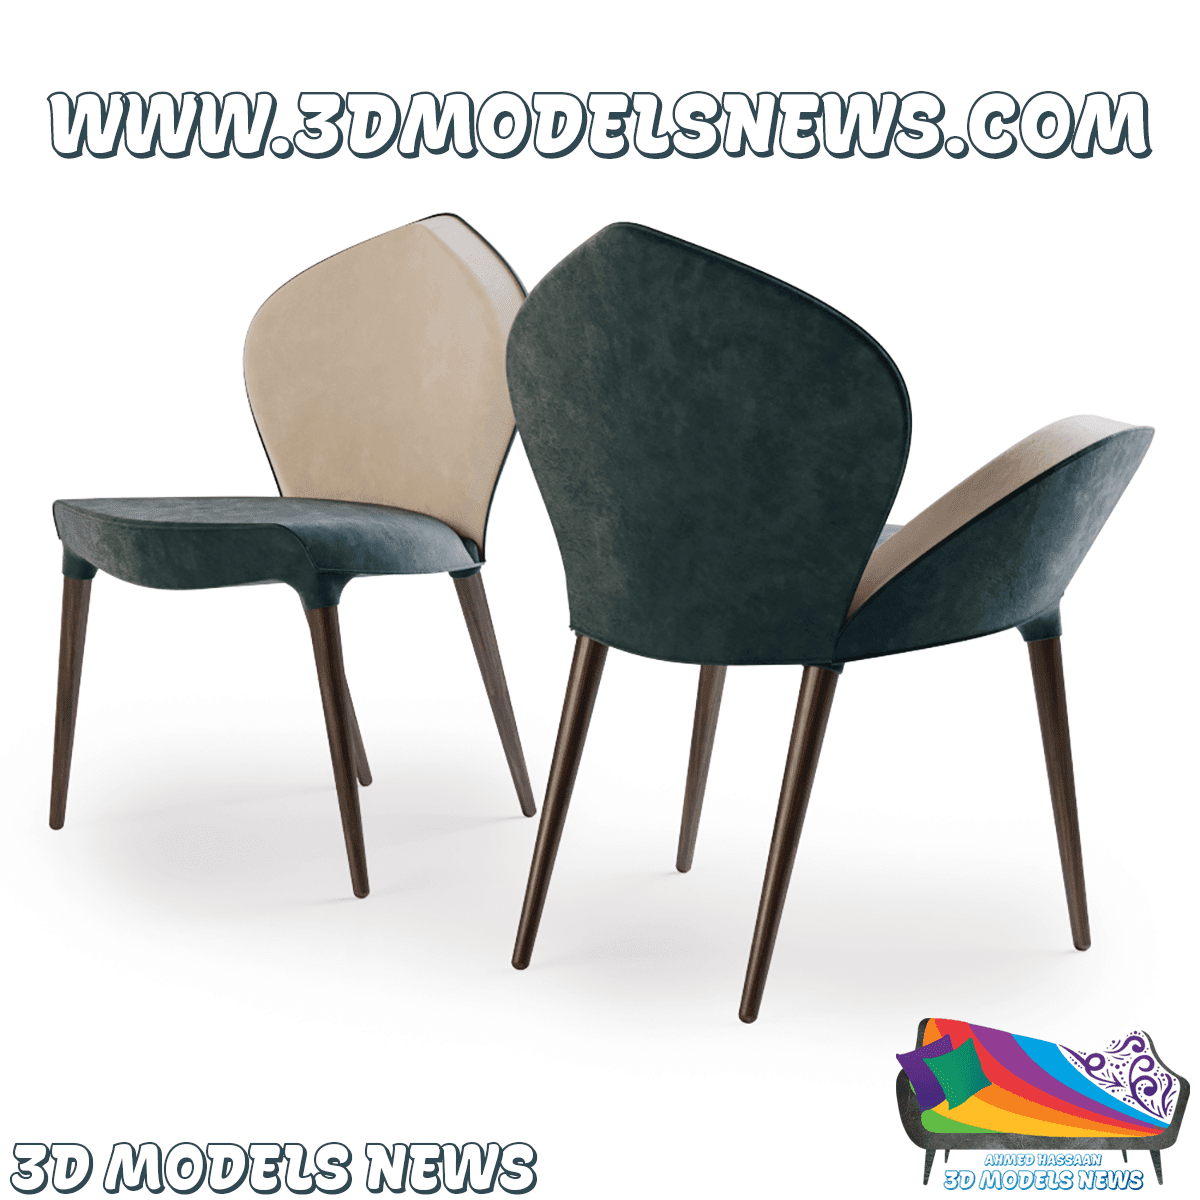 Poseidon chair model and classic style dining chair 1